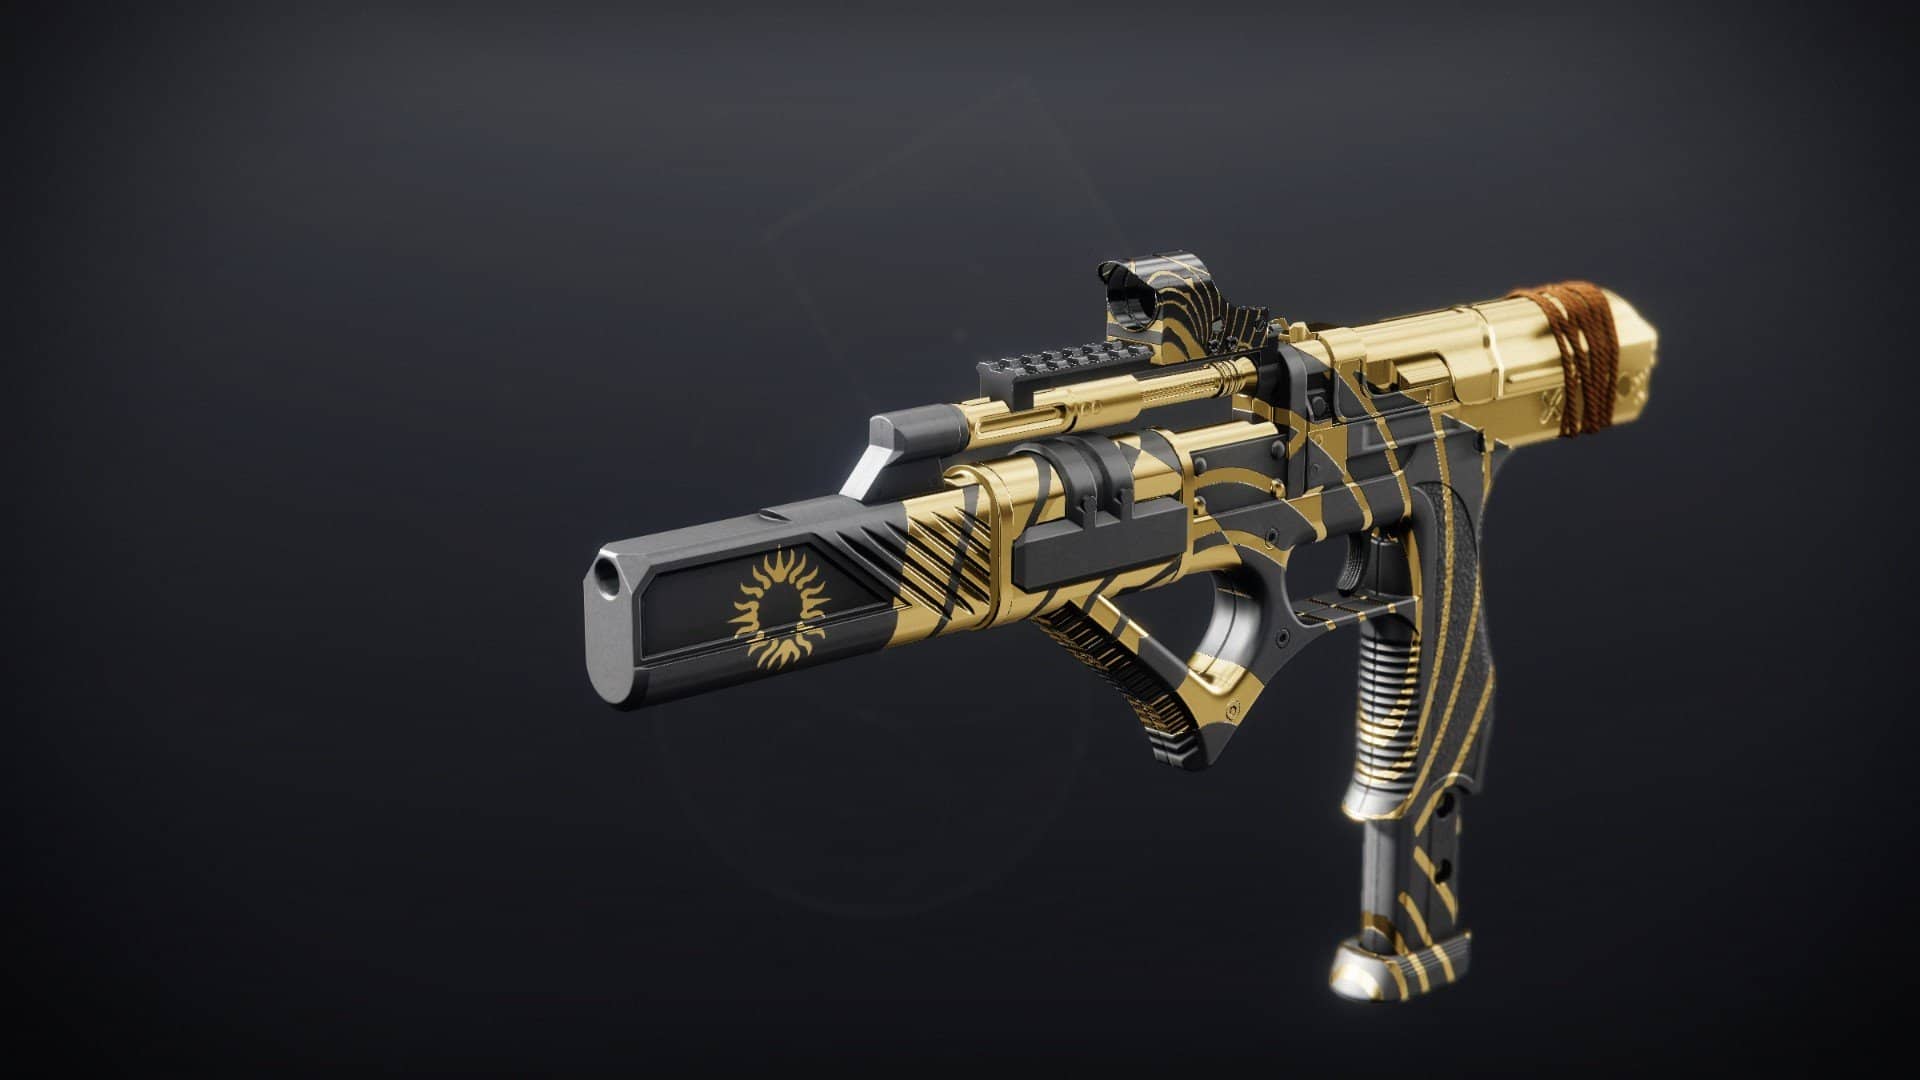 The Immortal SMG featured